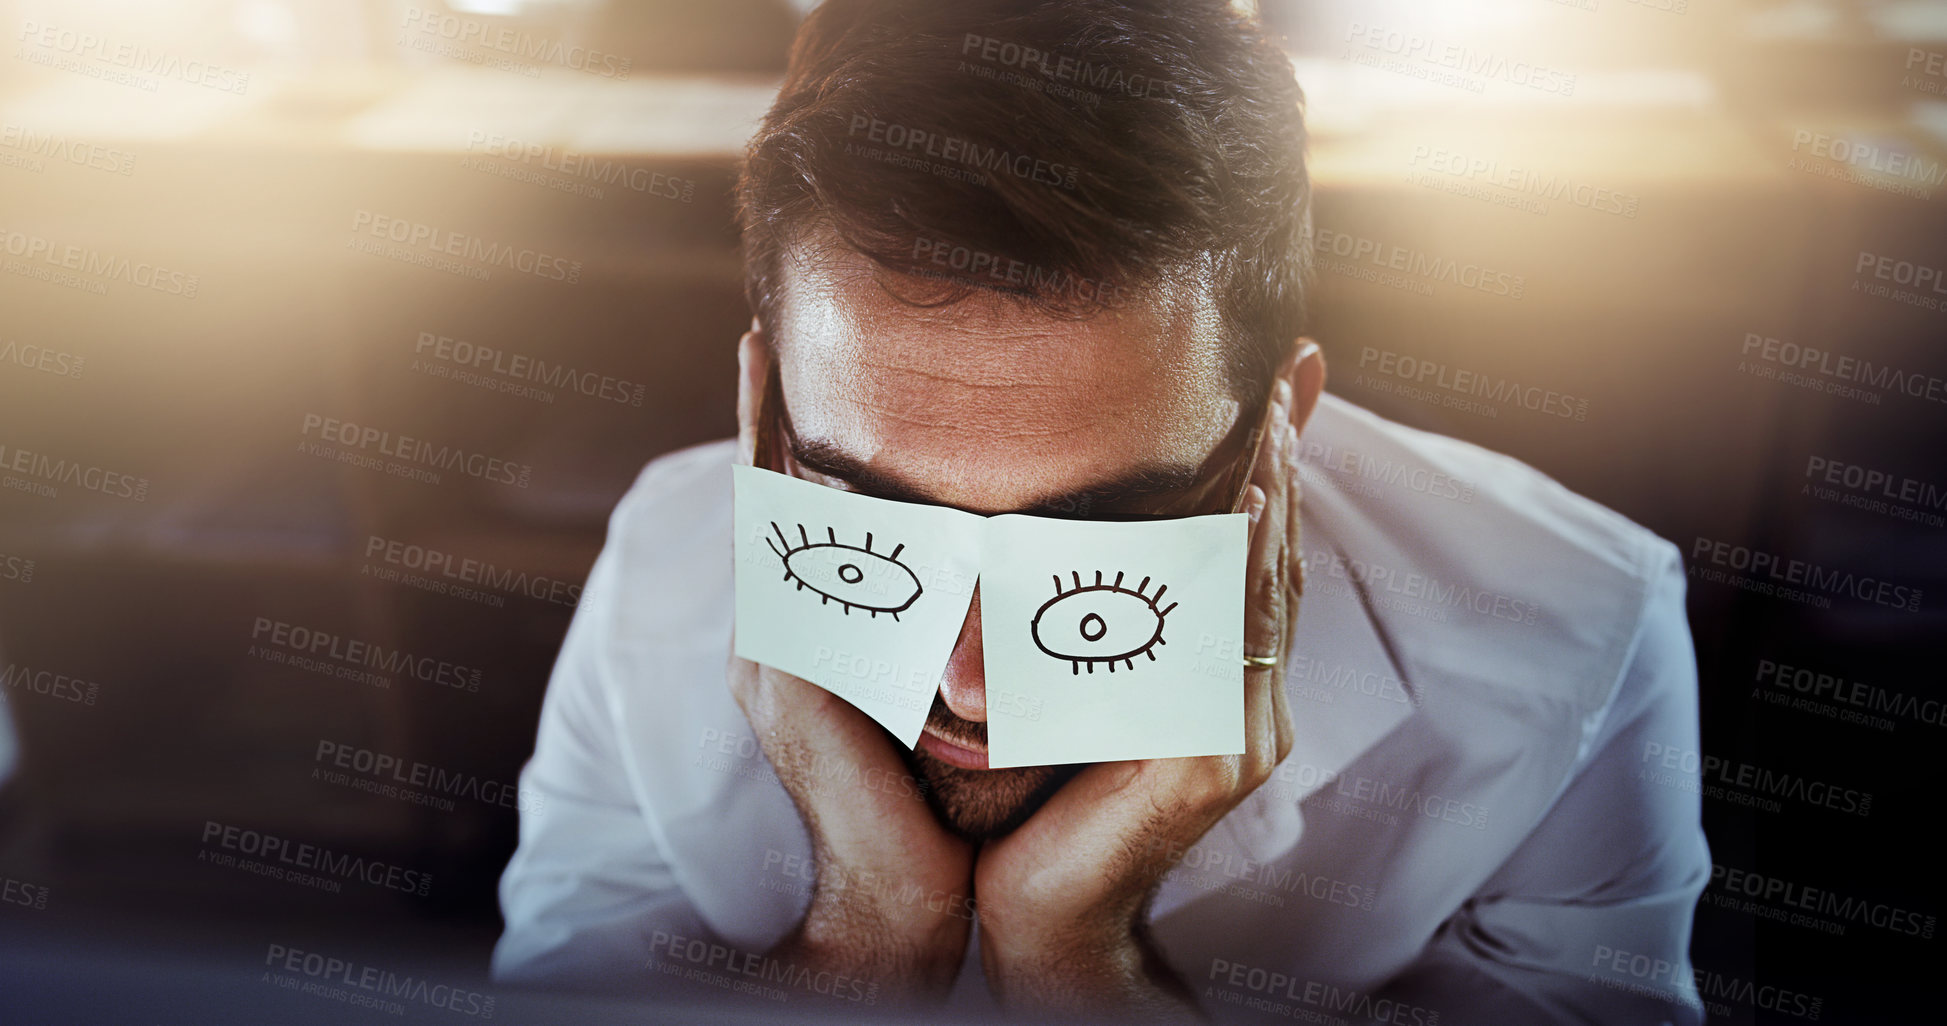 Buy stock photo Cropped shot of a young man with sticky notes over his glasses working late in his office